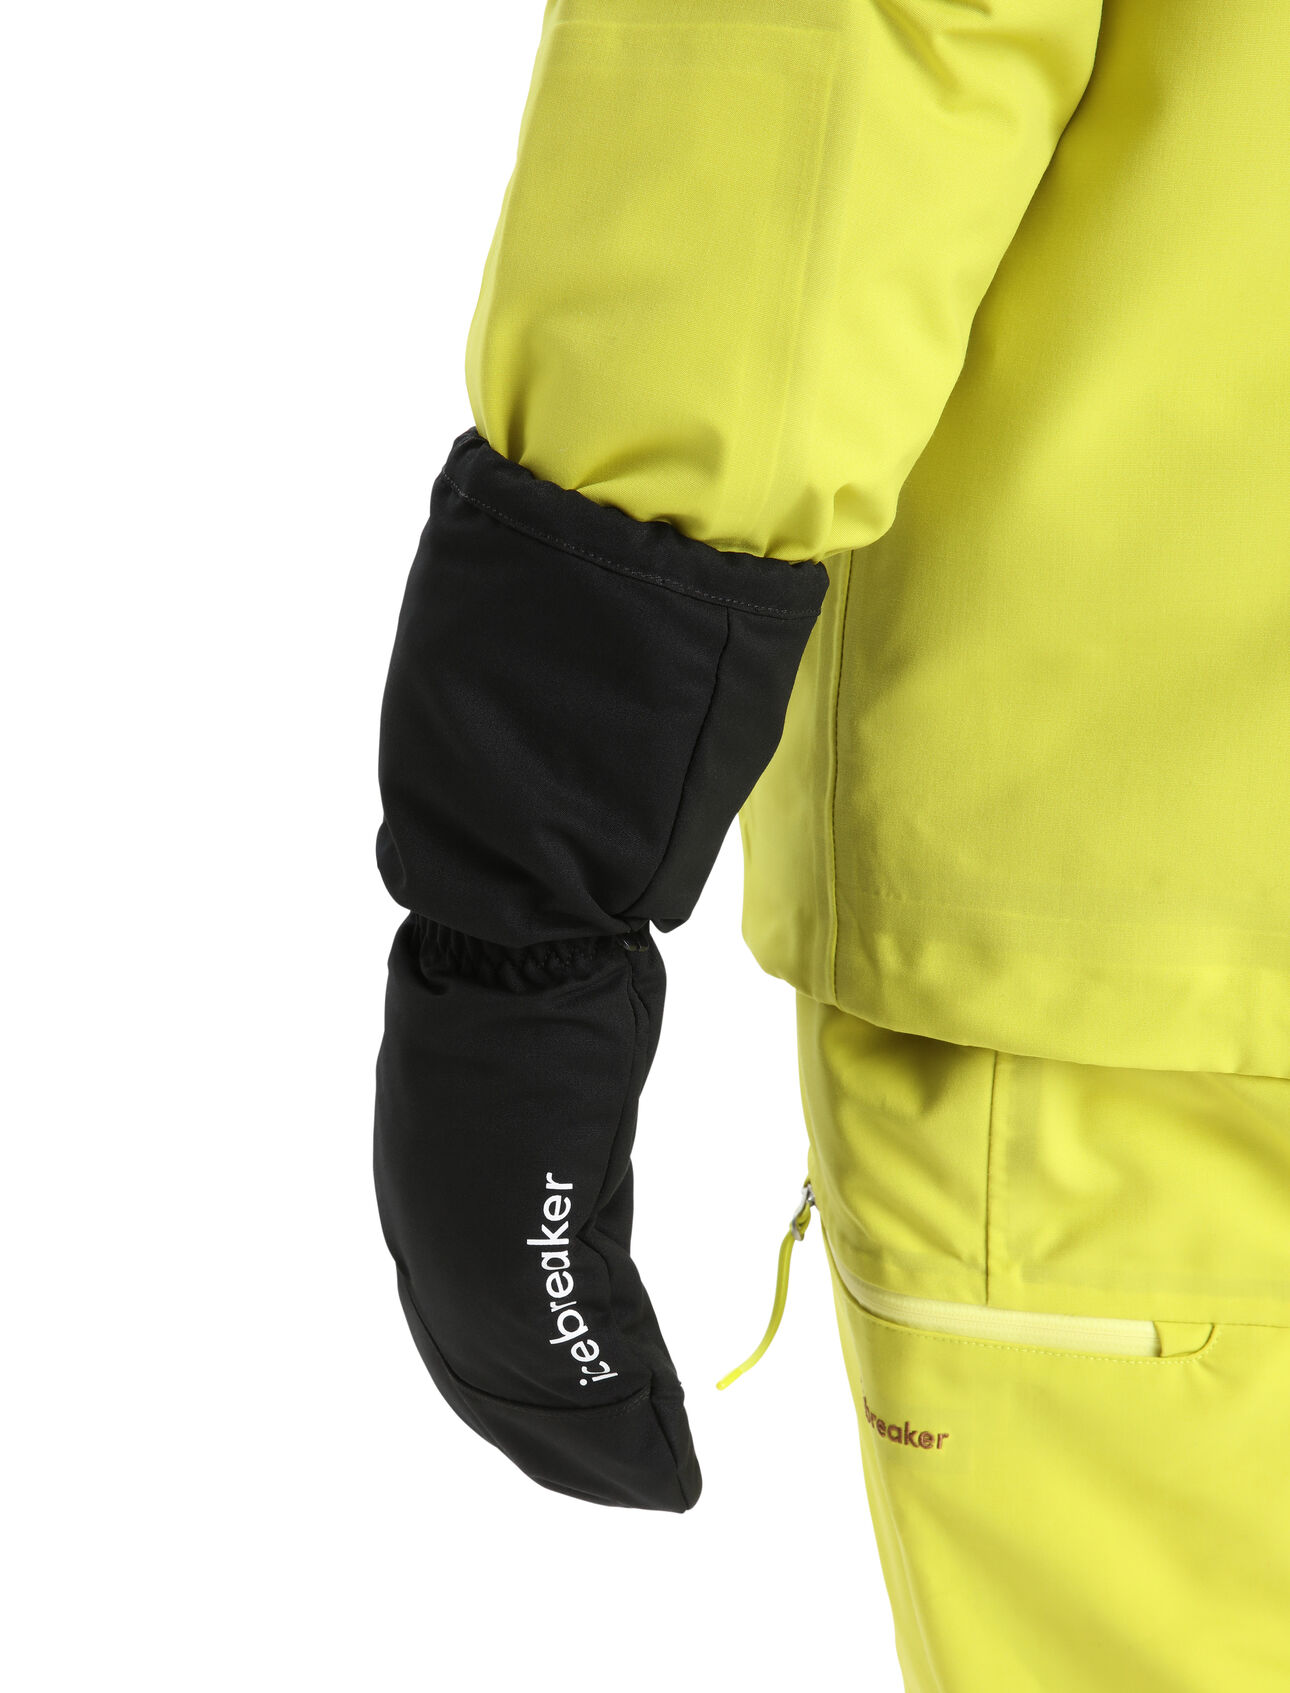 Unisex MerinoLoft™ Mittens Warm, breathable and weather-resistant protection from adverse winter conditions, the MerinoLoft™ Mittens are ideal for skiing, winter hiking, and other active cold-weather pursuits.  